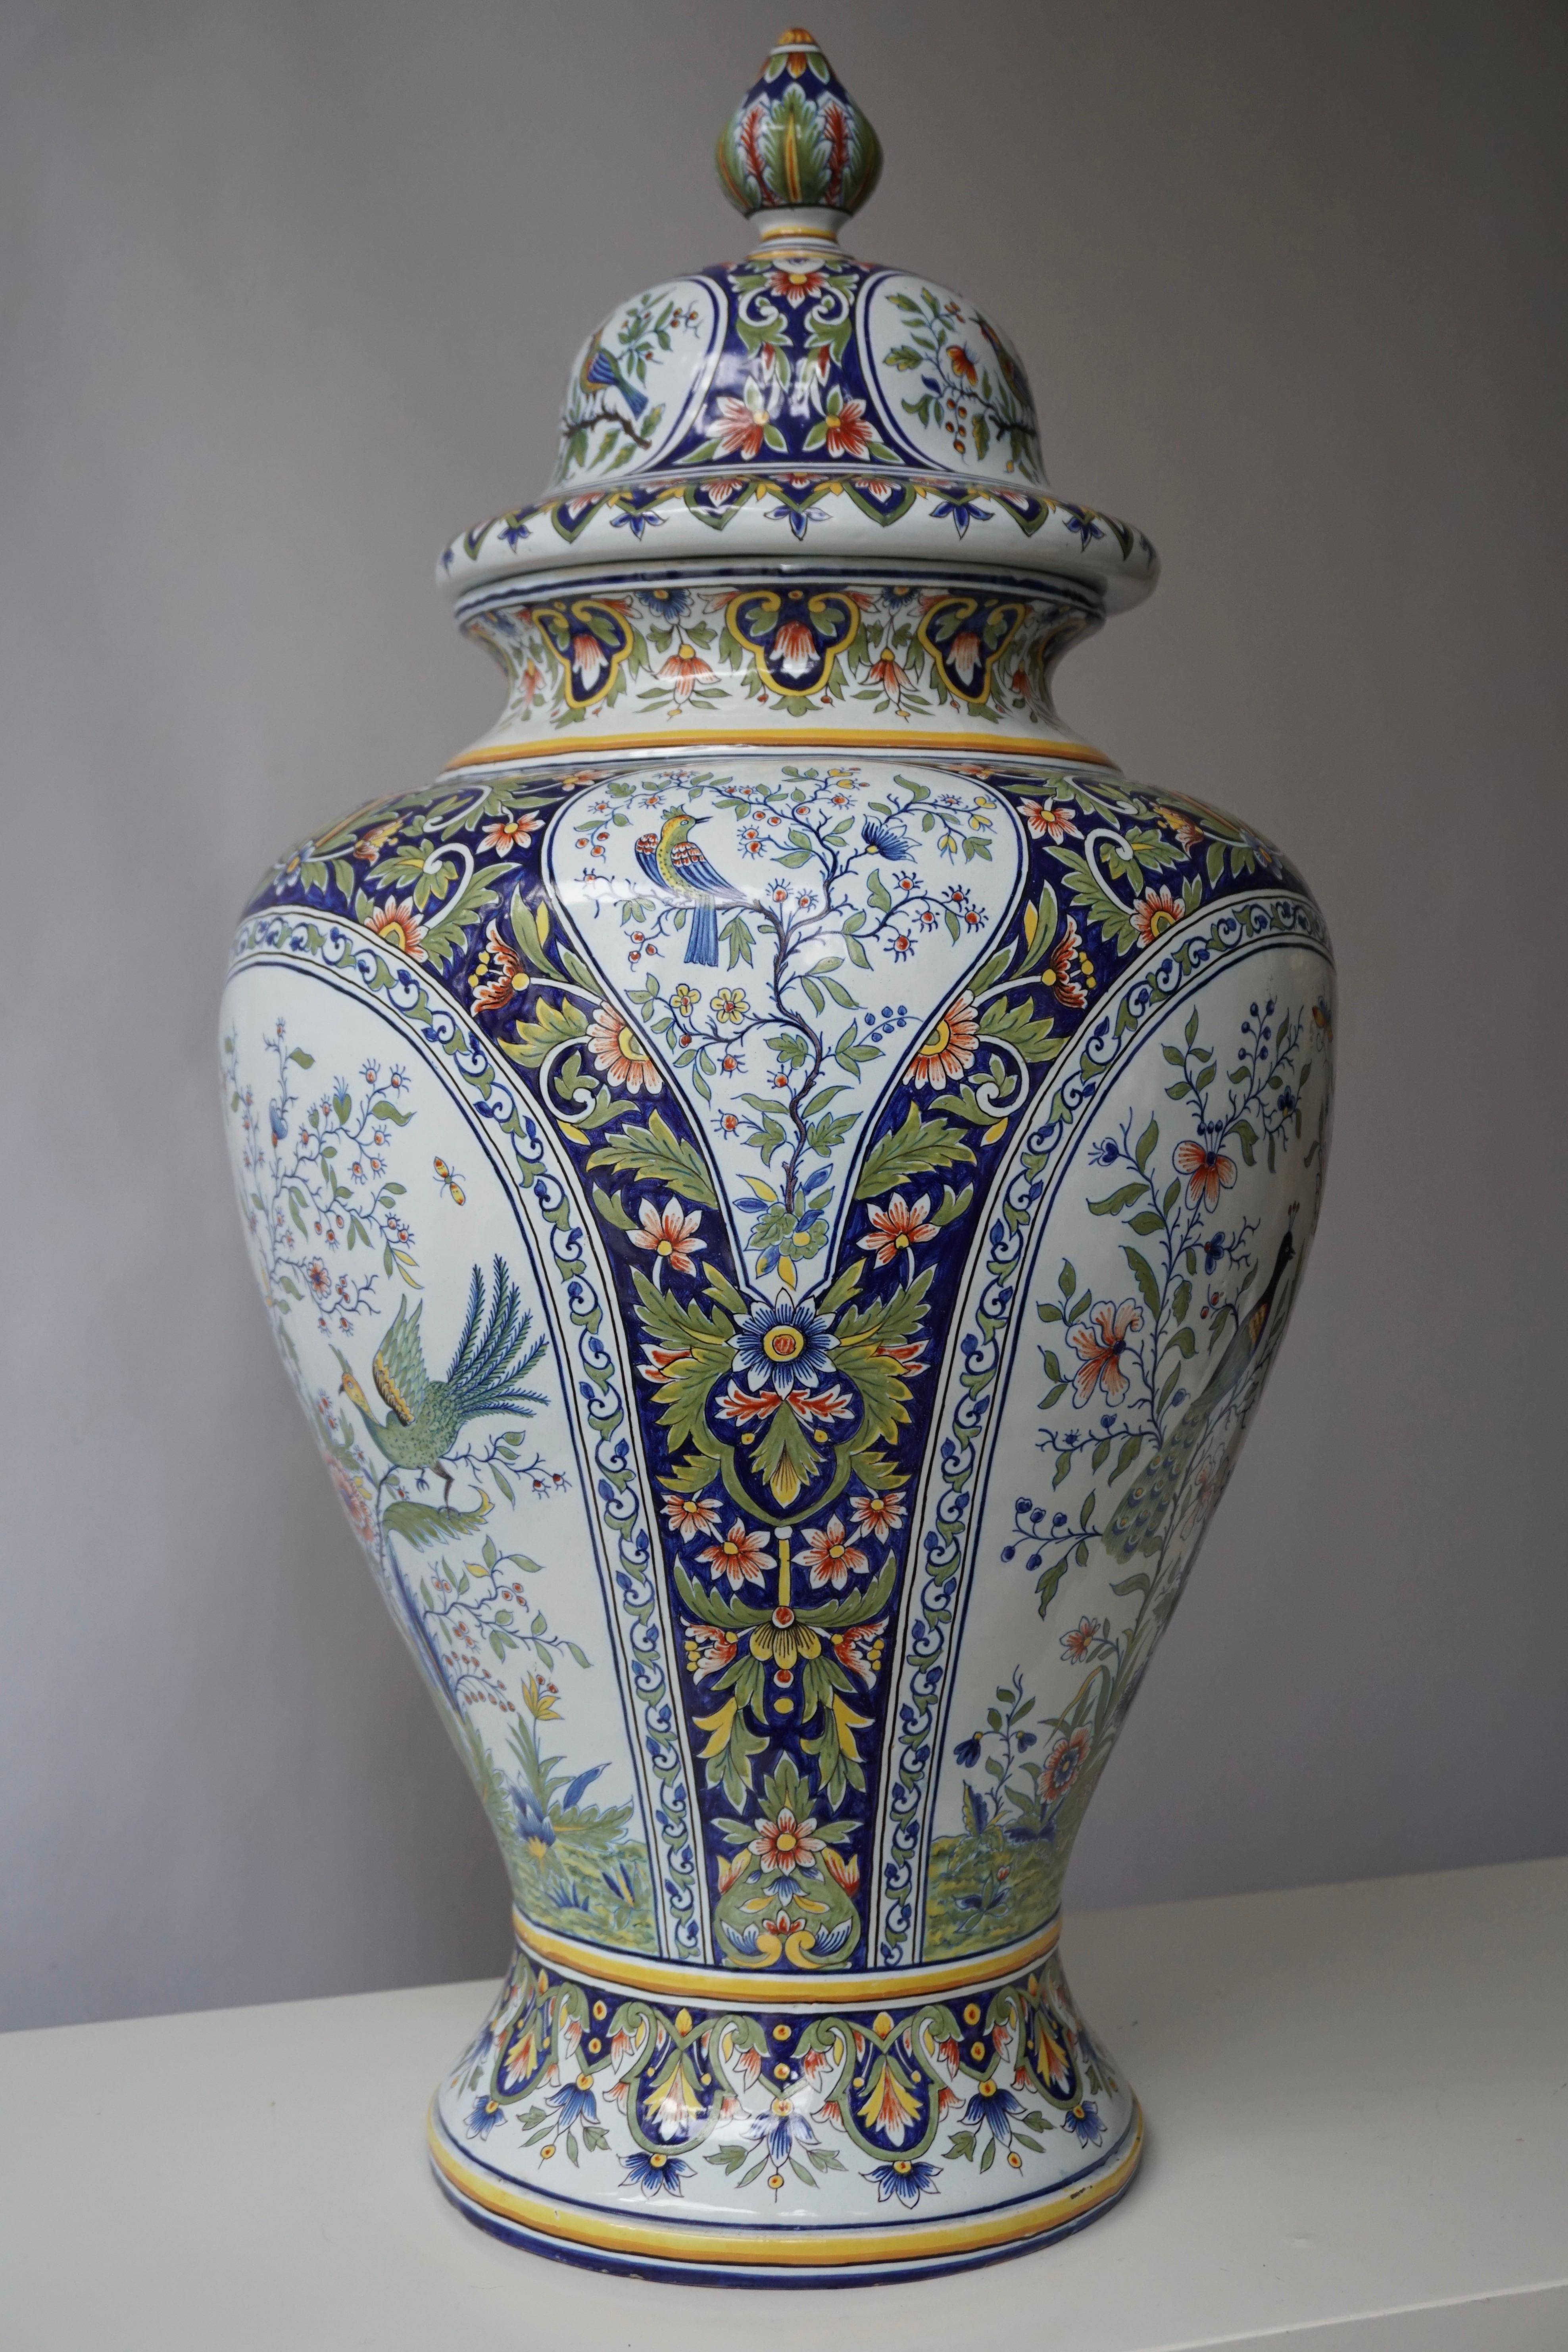 French Hand Painted Faience Urn or Vase with Flowers and Birds Motifs 4